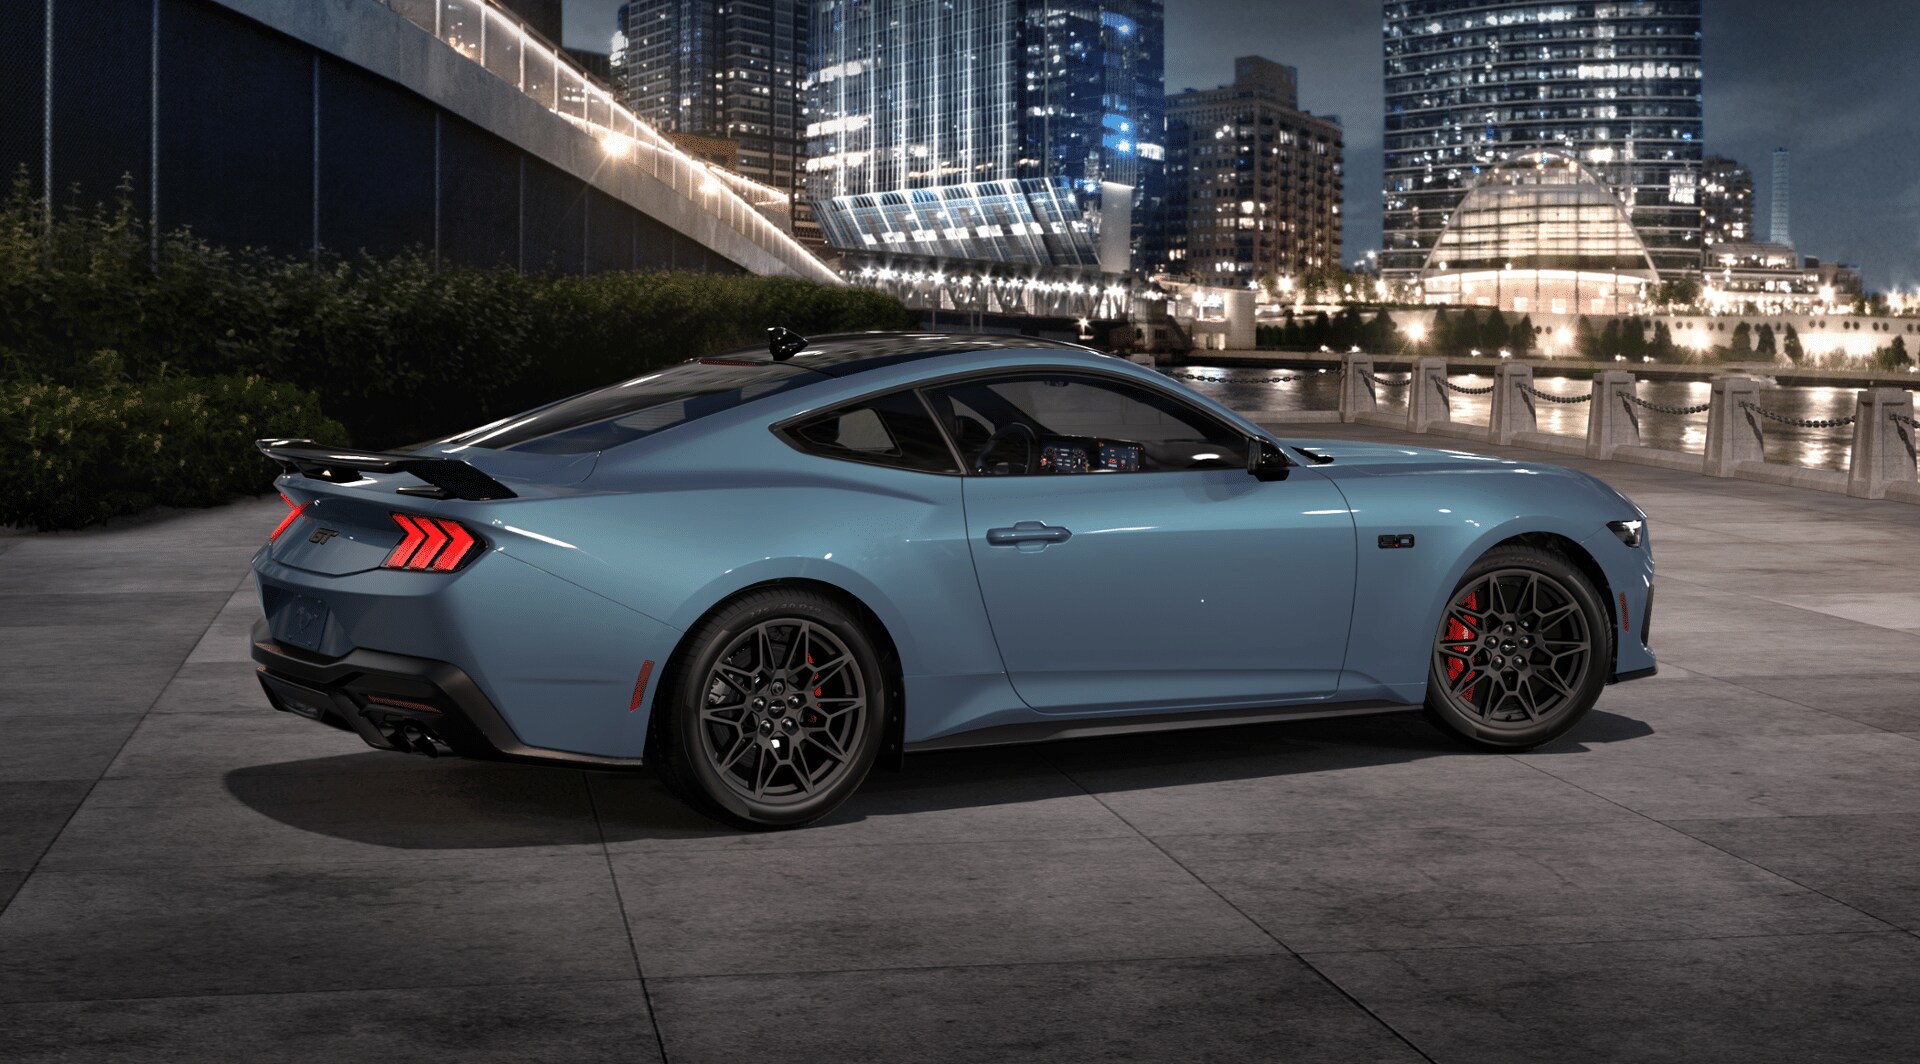 S650 Mustang Official VAPOR BLUE Mustang S650 Thread vehicle